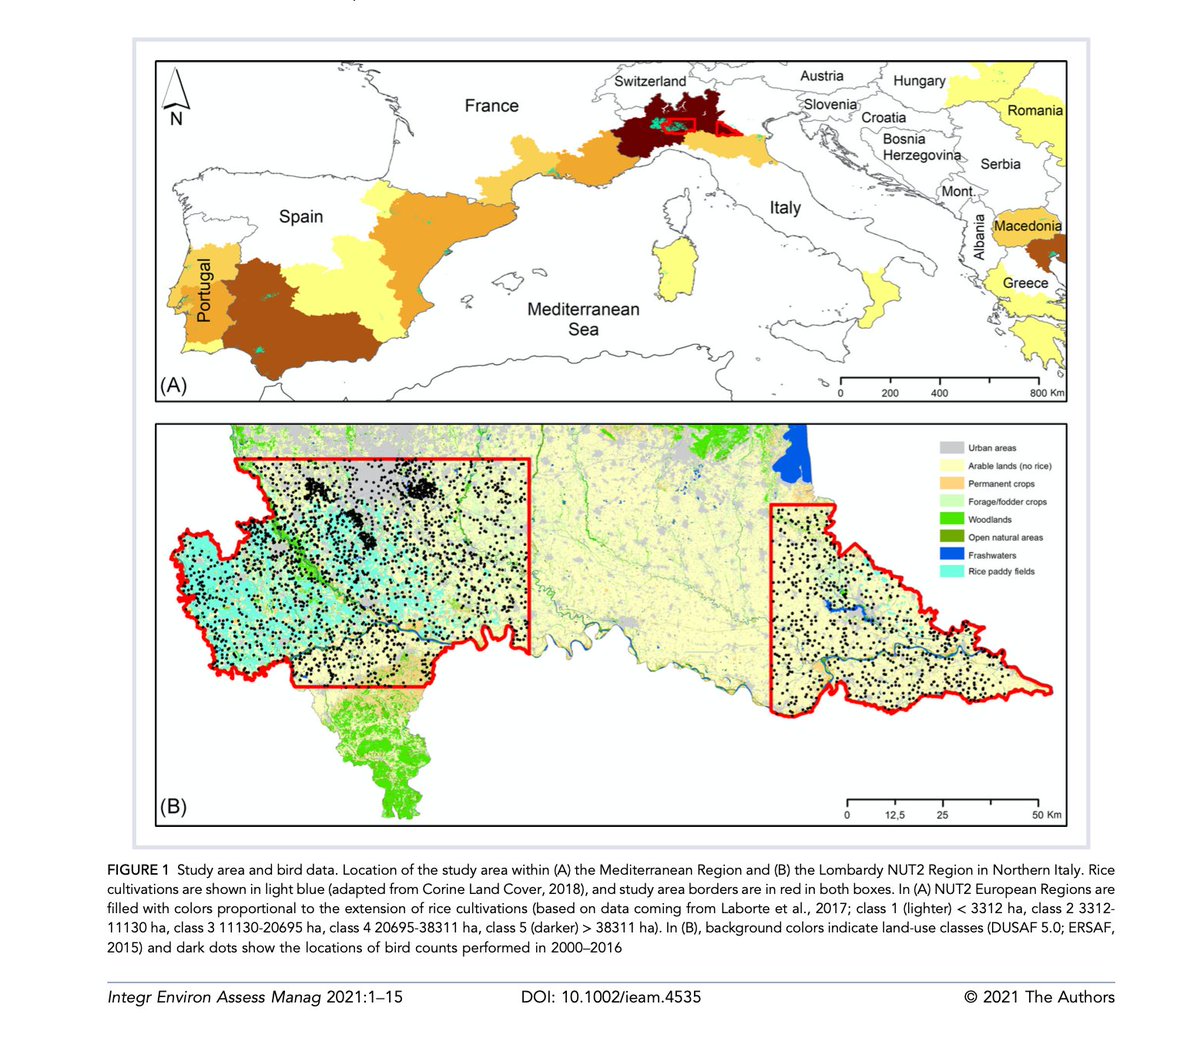 New contribution by our member Luciano Bani 'Quantitative selection of focal #birds and #mammals in higher‐tier risk assessment: An application to rice cultivations'. researchgate.net/publication/35… #biodiversity #conservation #cultivations #rice #modelling